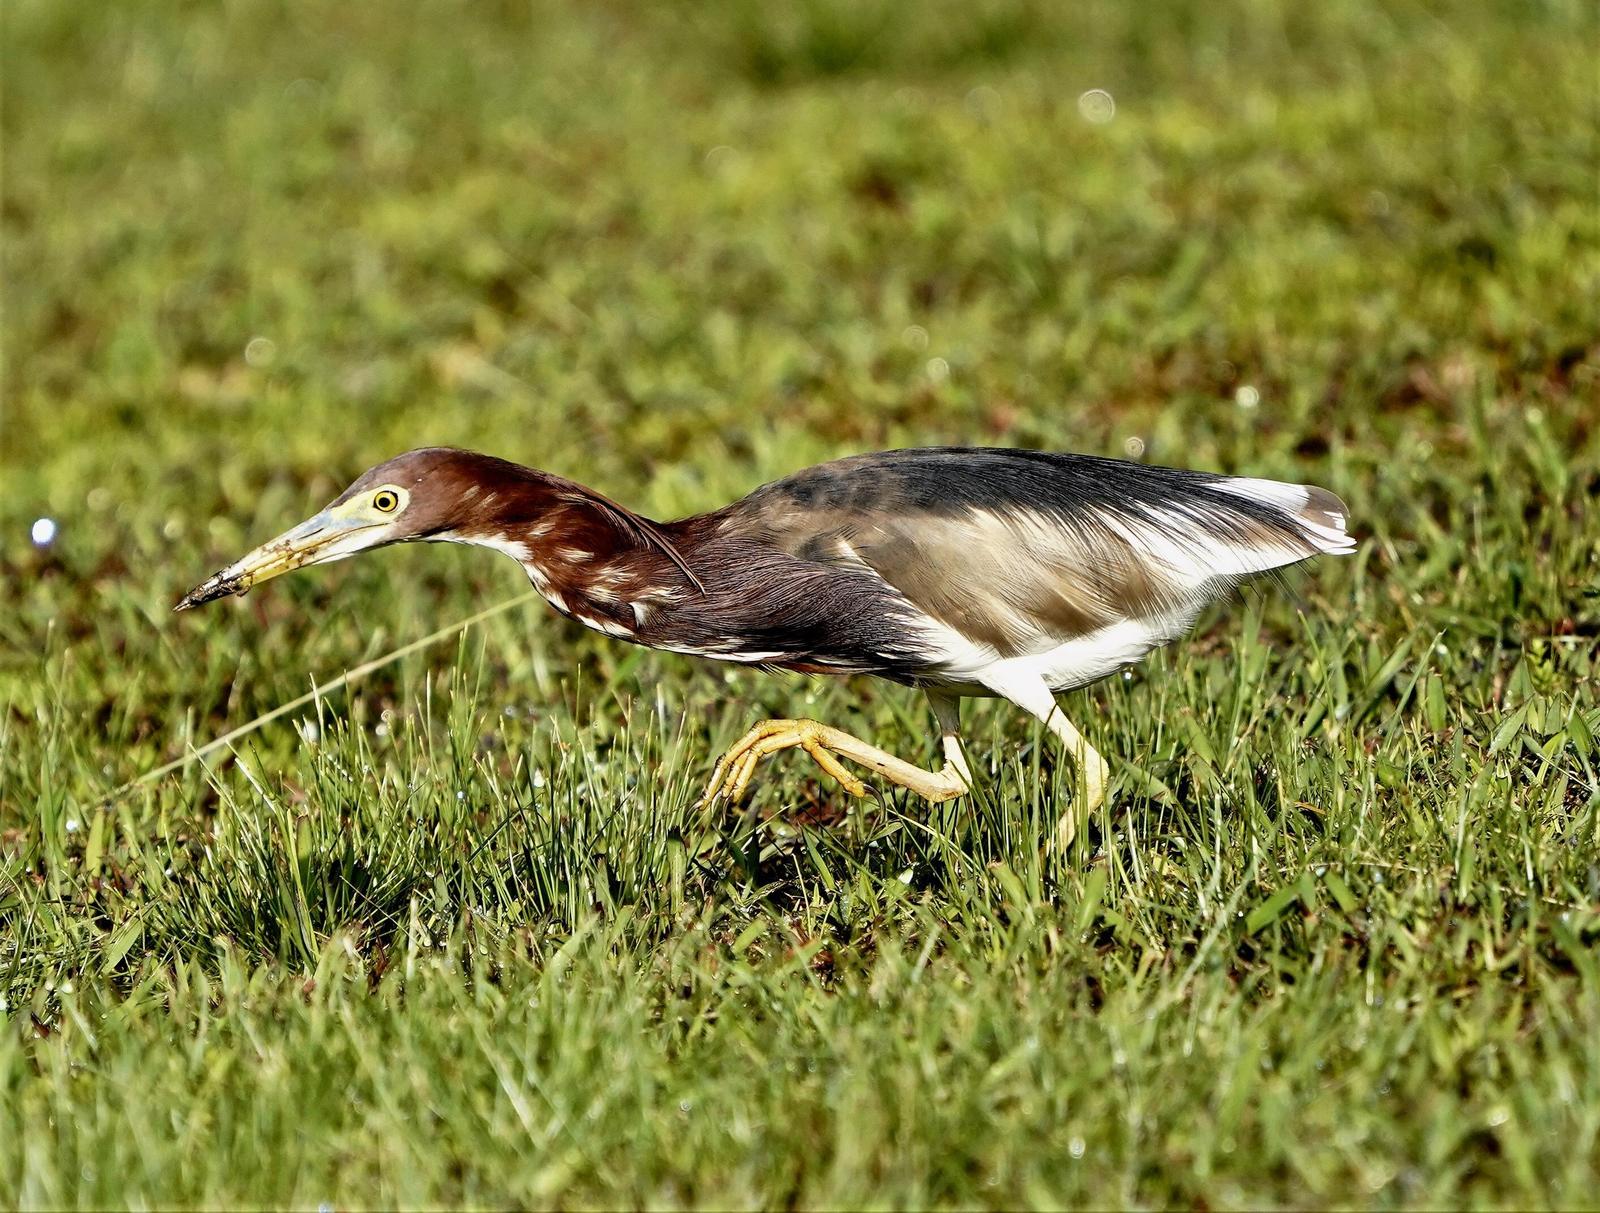 Chinese Pond-Heron Photo by Steven Cheong